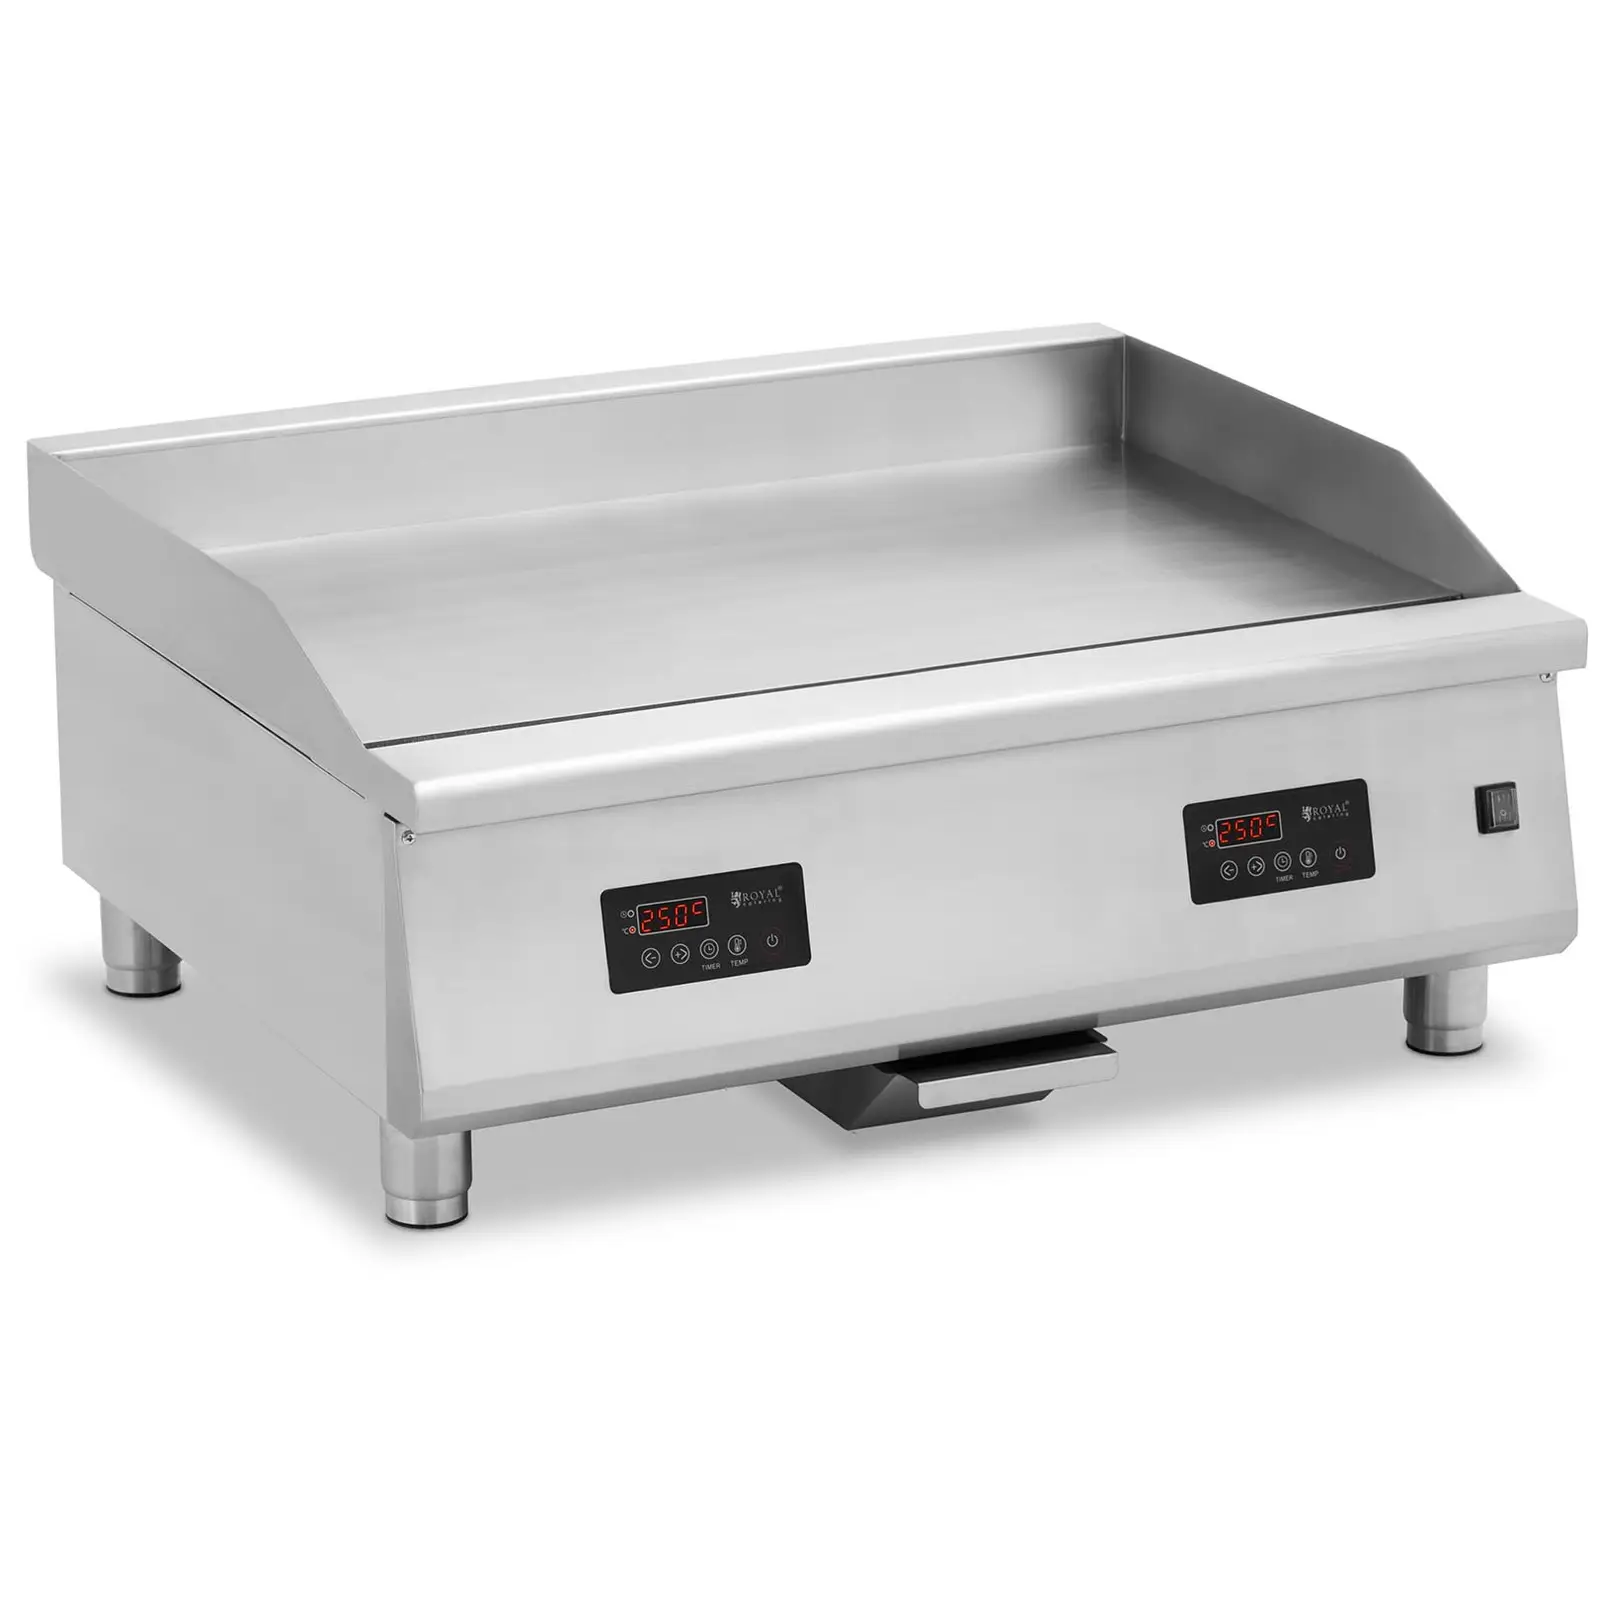 Double Induction Grill - 910 x 520 mm - smooth - 2 x 6000 W - Royal Catering